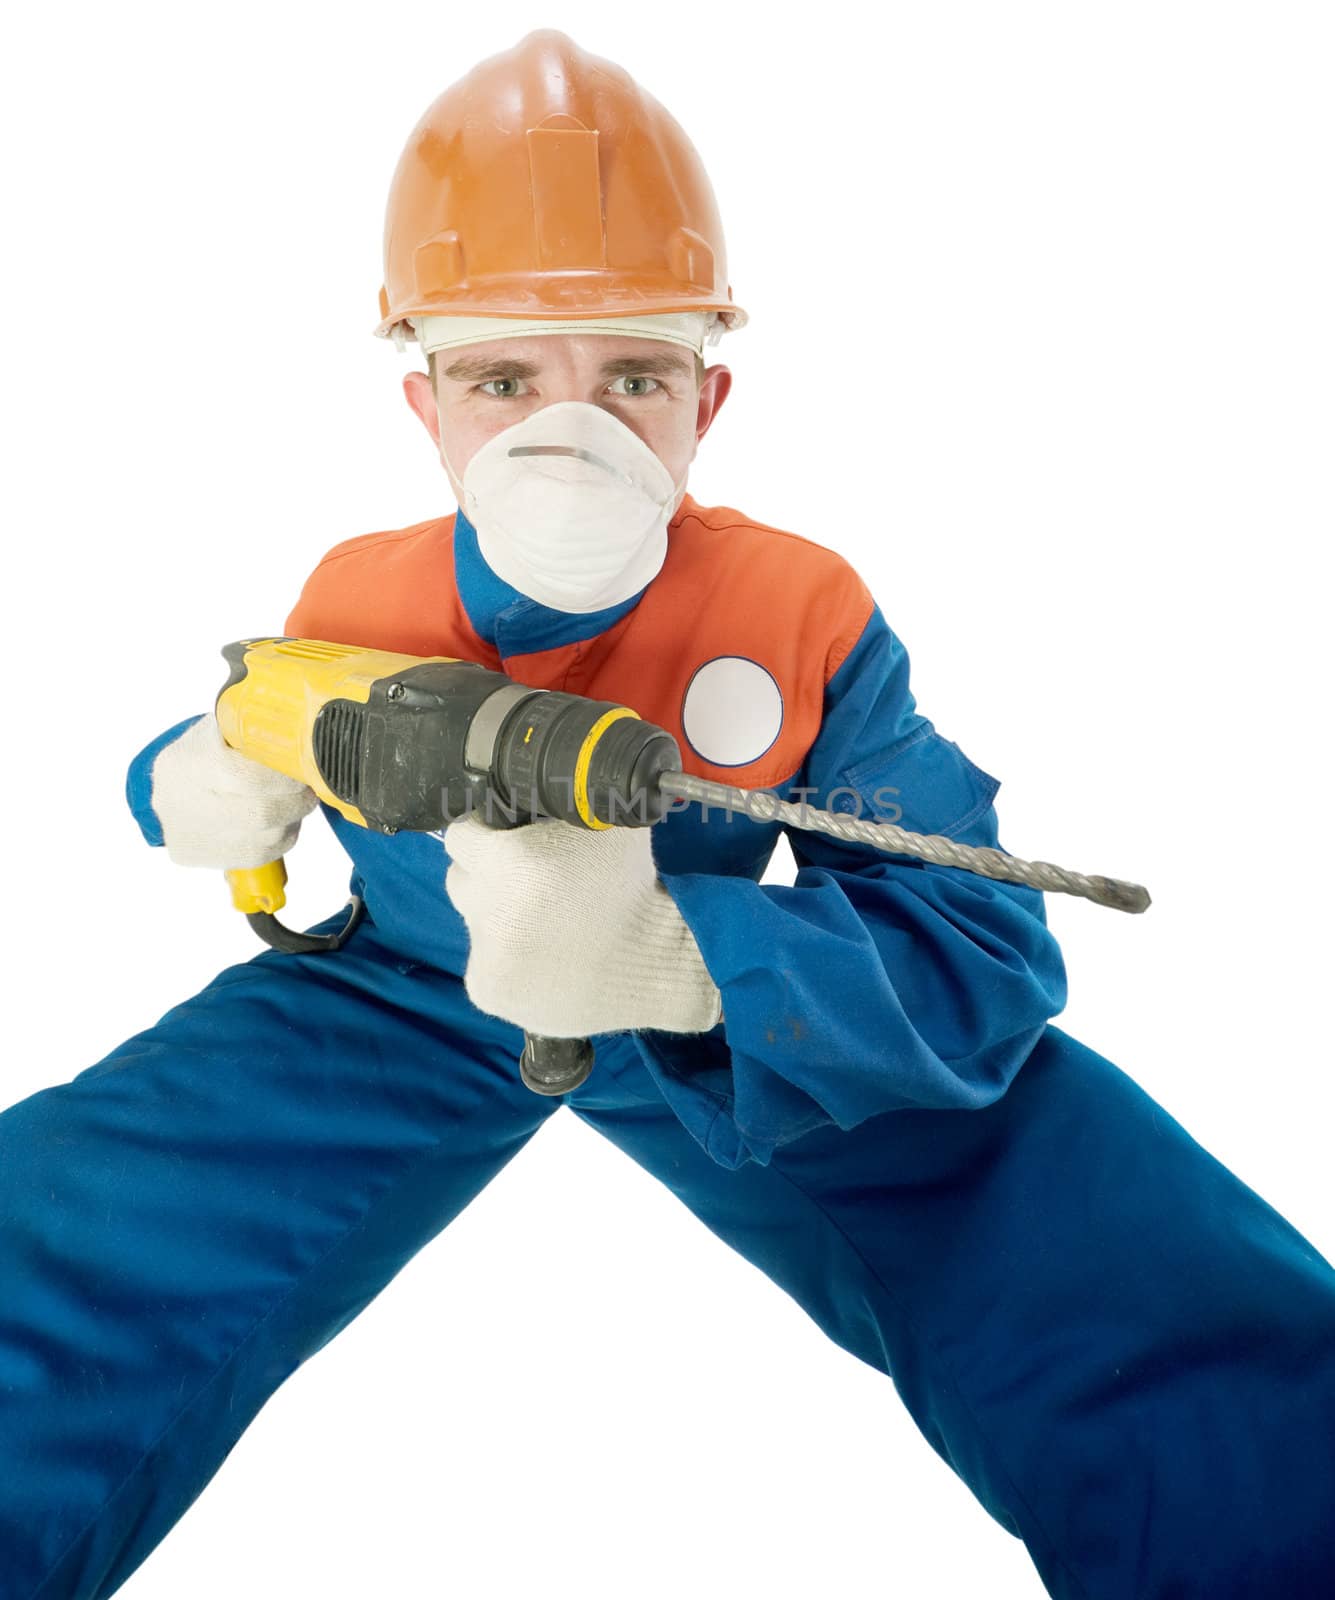 Labourer on the helmet with hand drill on a white background